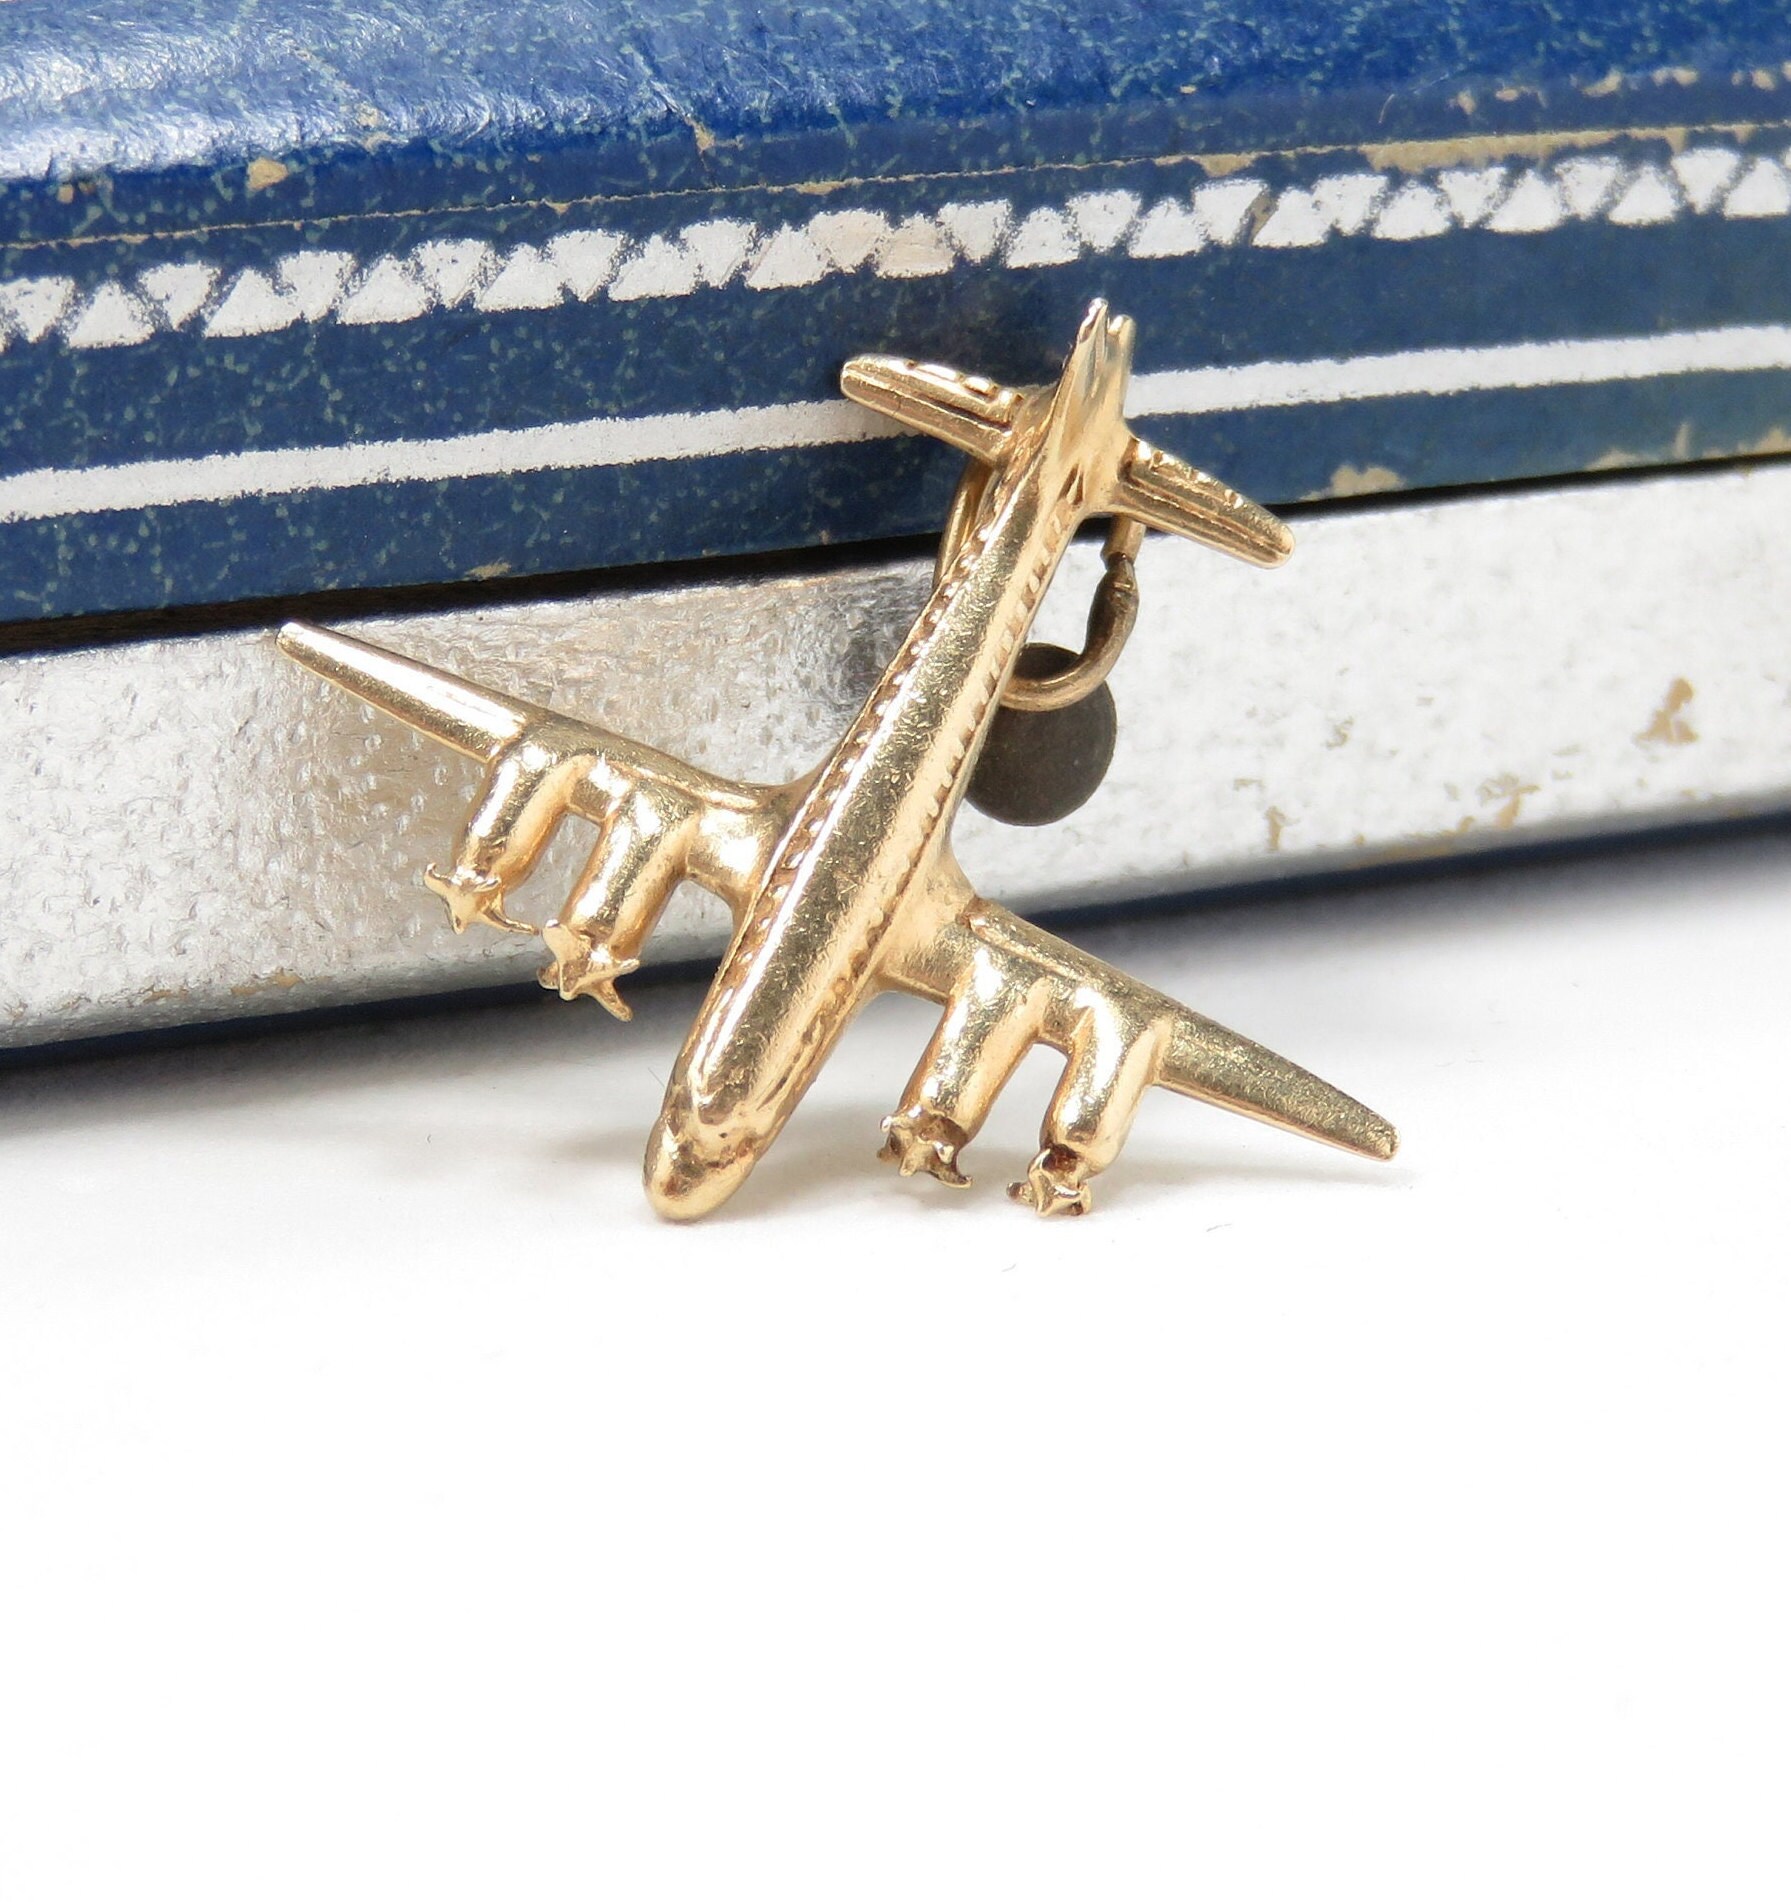 Aviation Jewelry, Gold Cessna Float Airplane Pendant